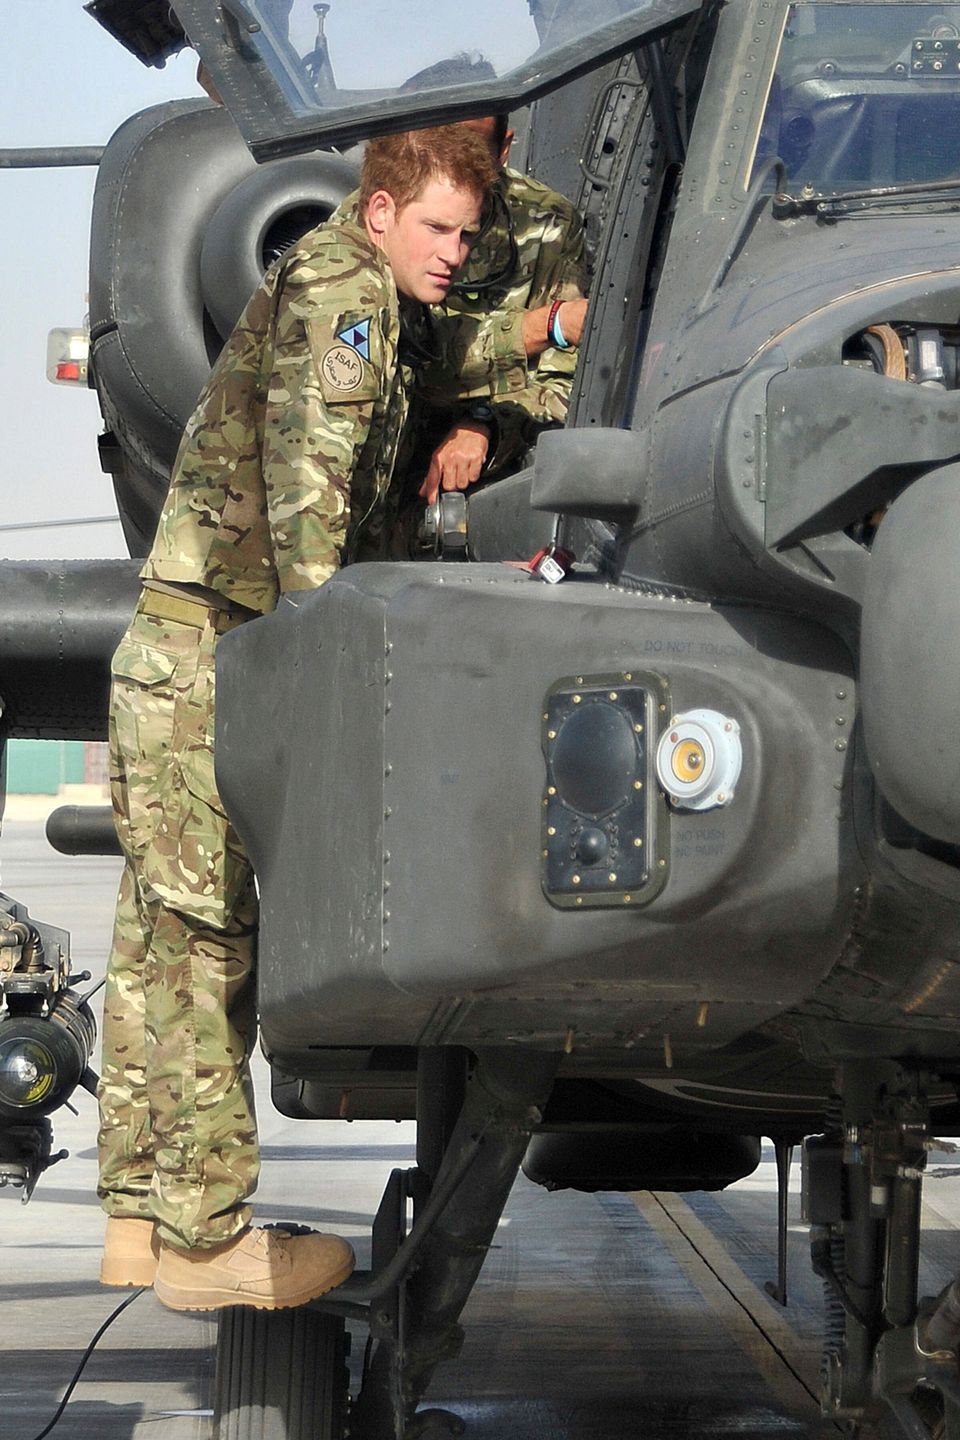 Prince Harry tour of duty in Afghanistan